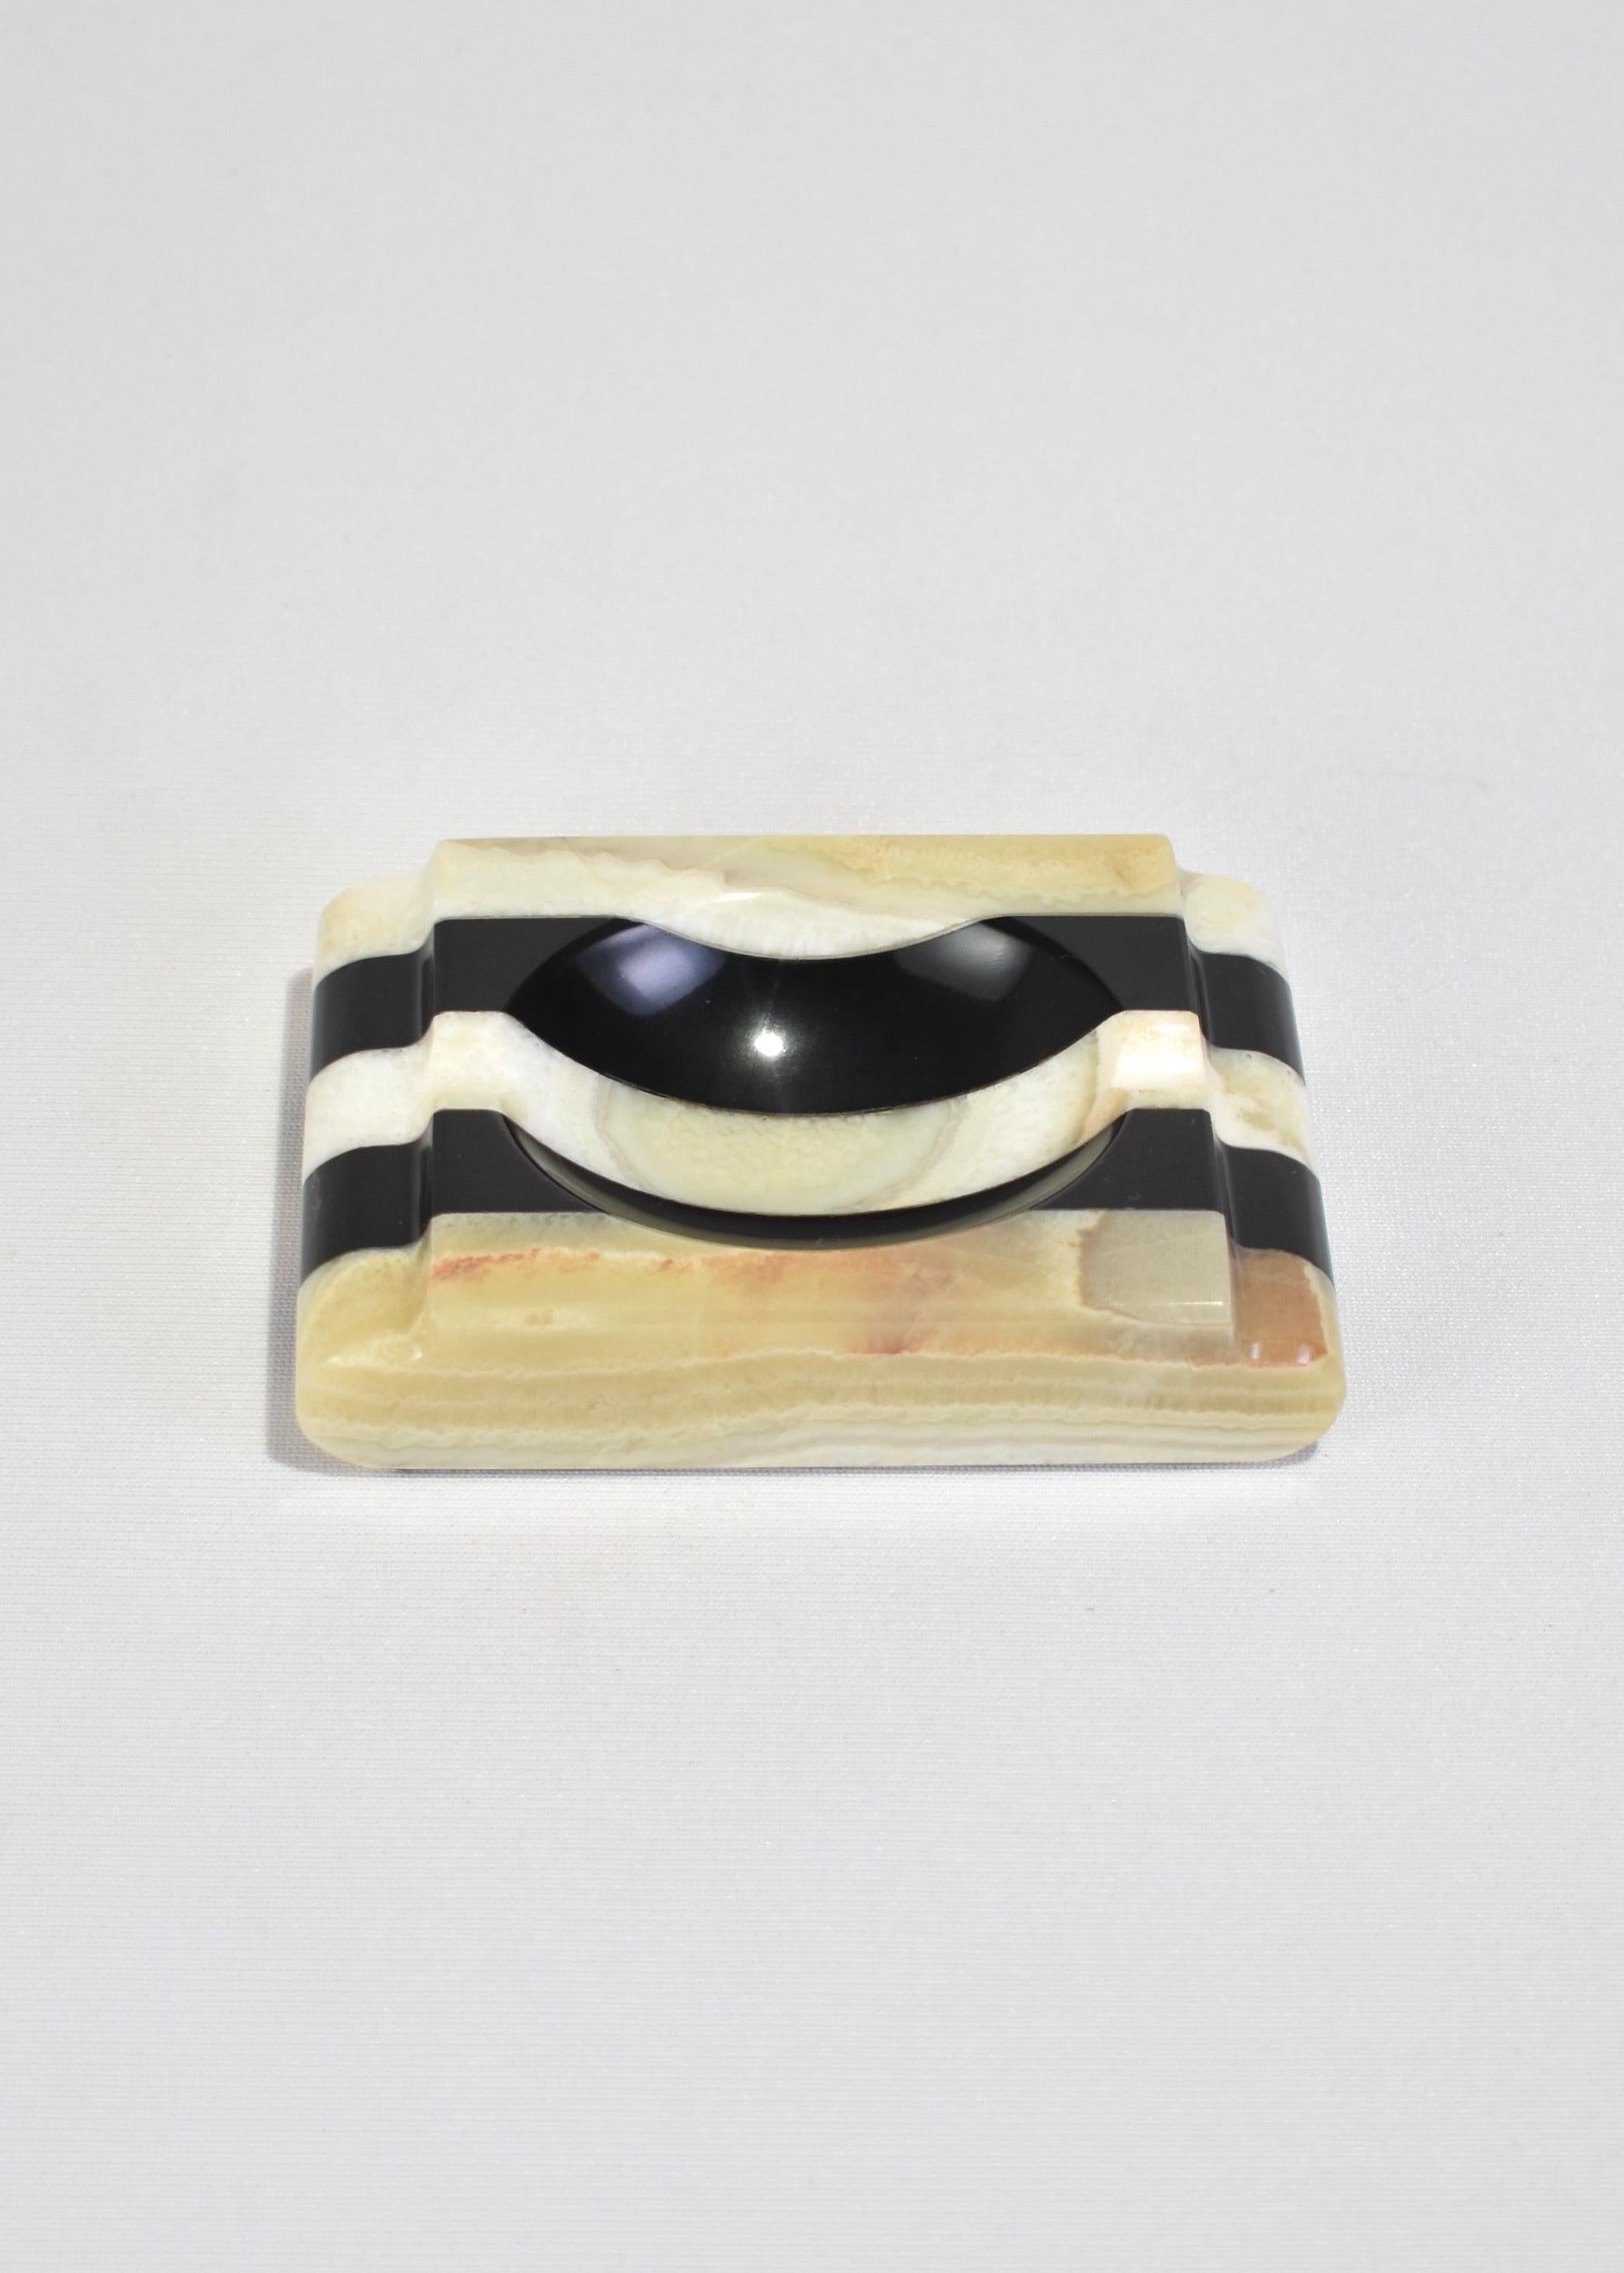 Vintage carved black and white striped onyx catchall or ashtray with a felt base.